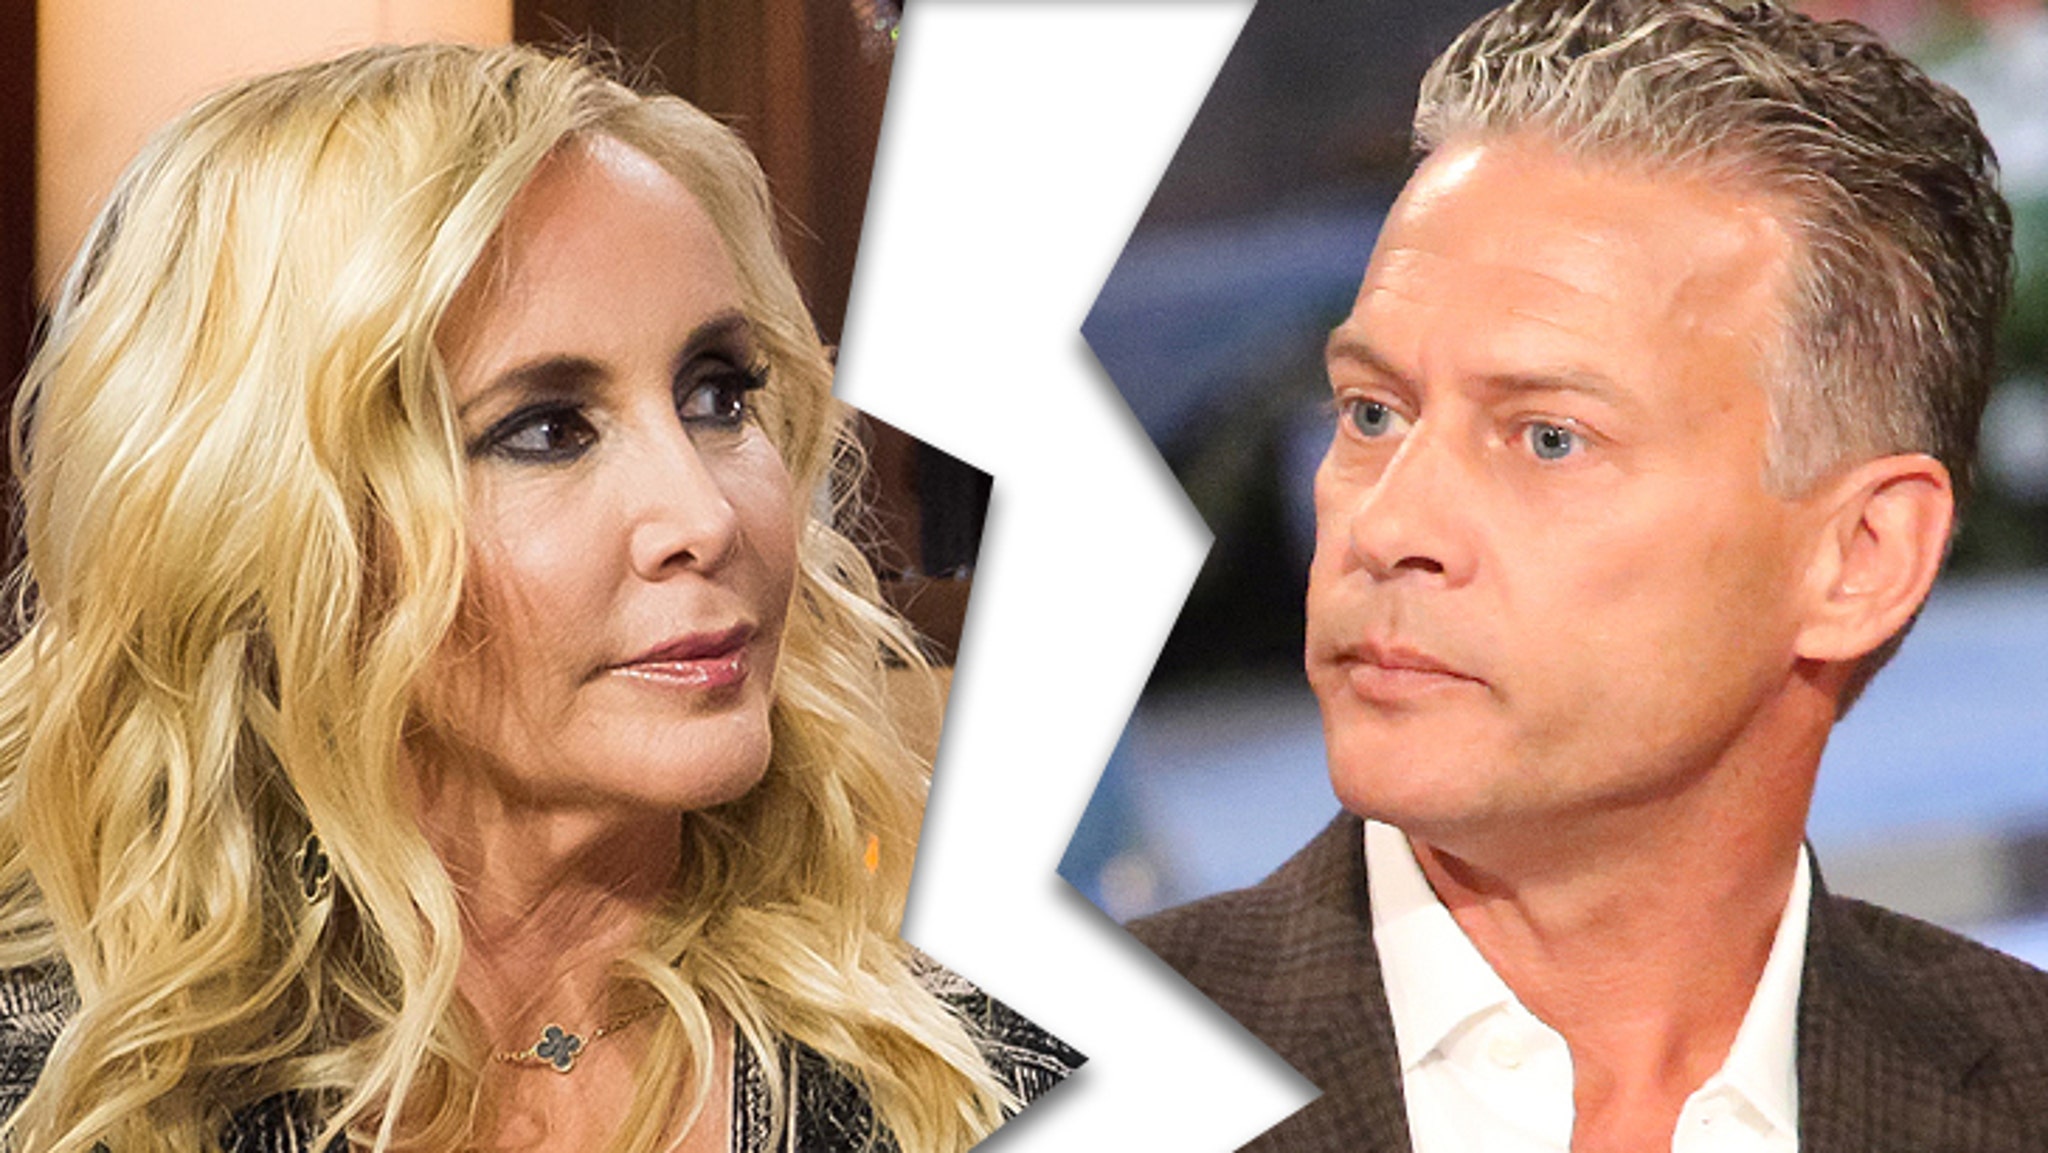 'RHOC' Star Shannon Beador Separates from Husband of 17 Years